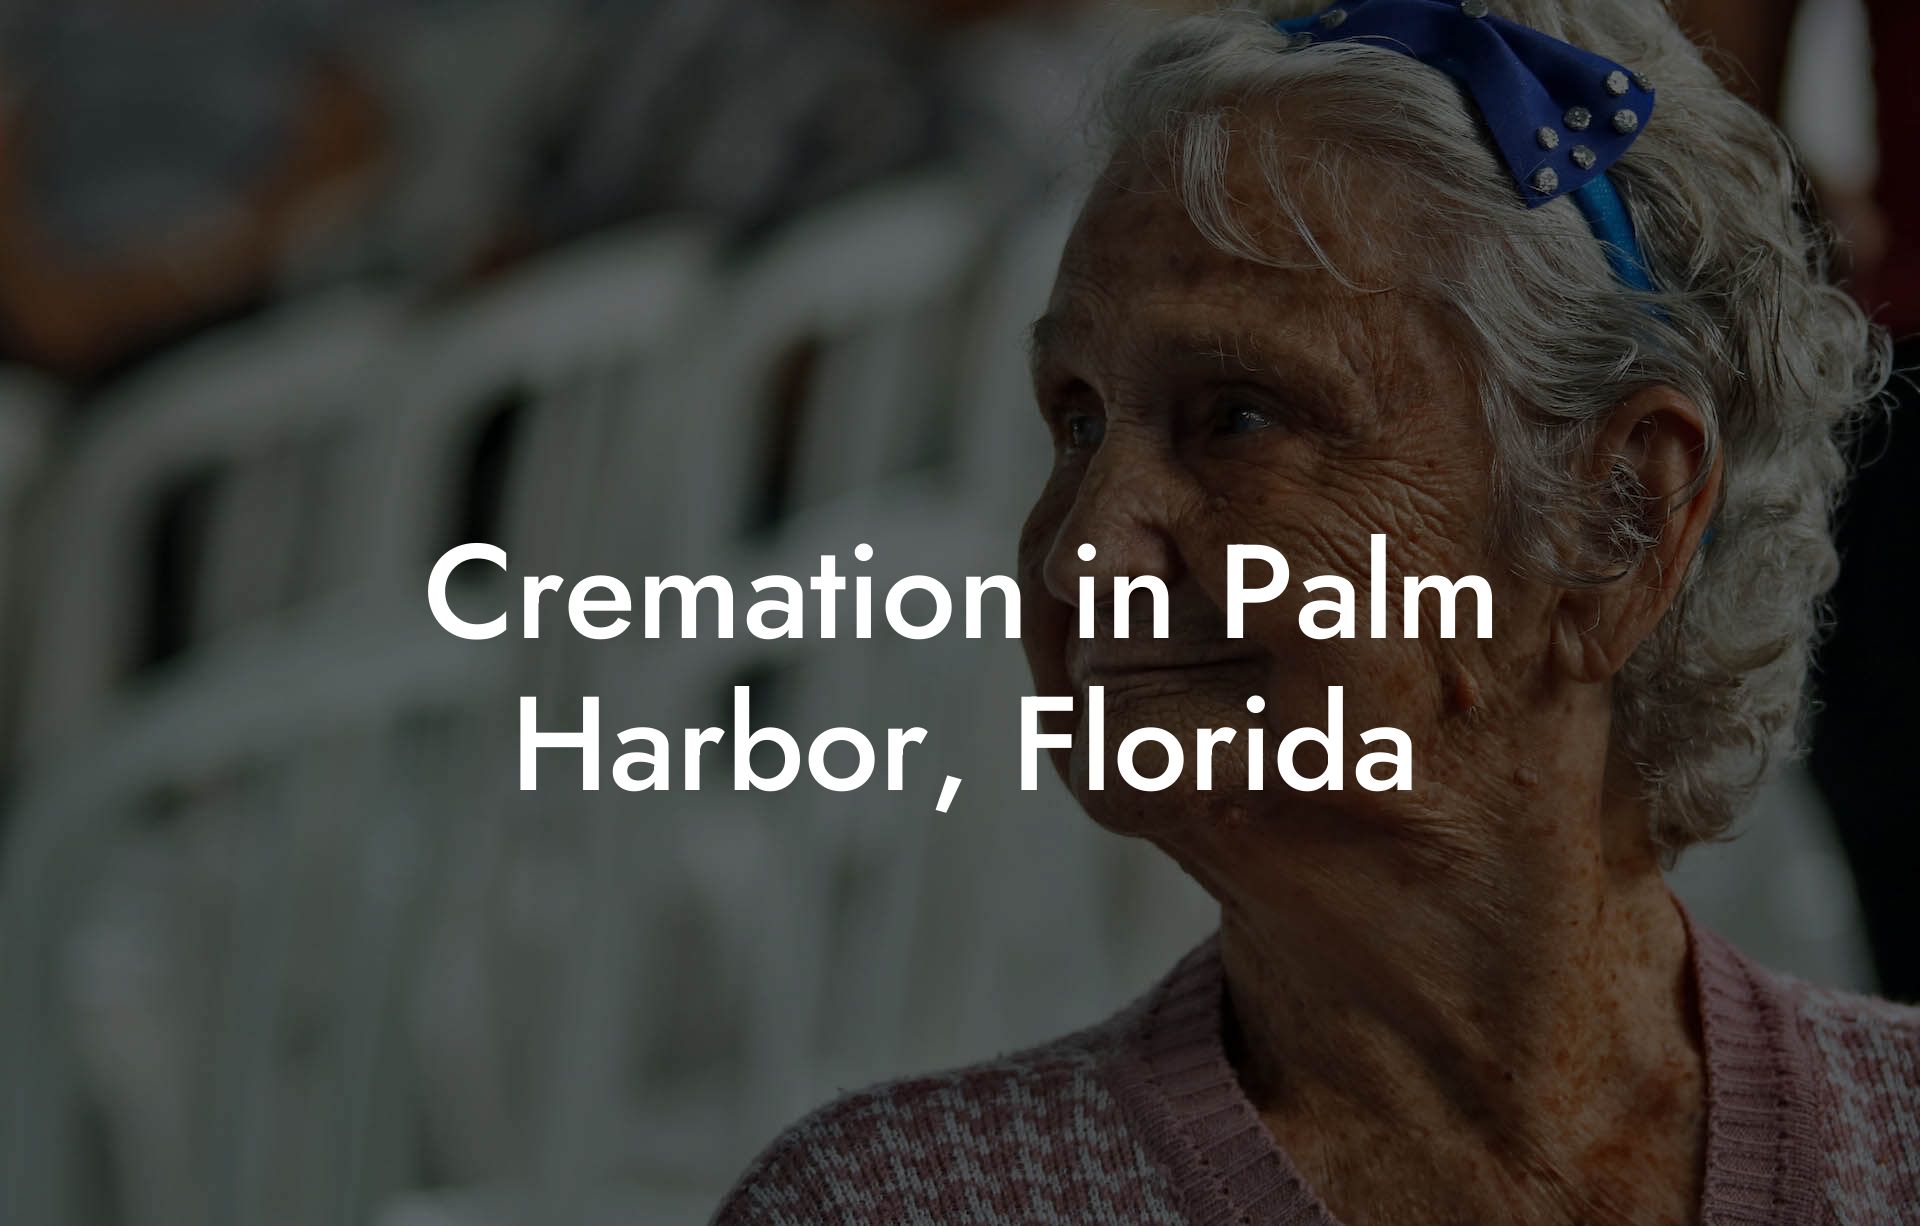 Cremation in Palm Harbor, Florida